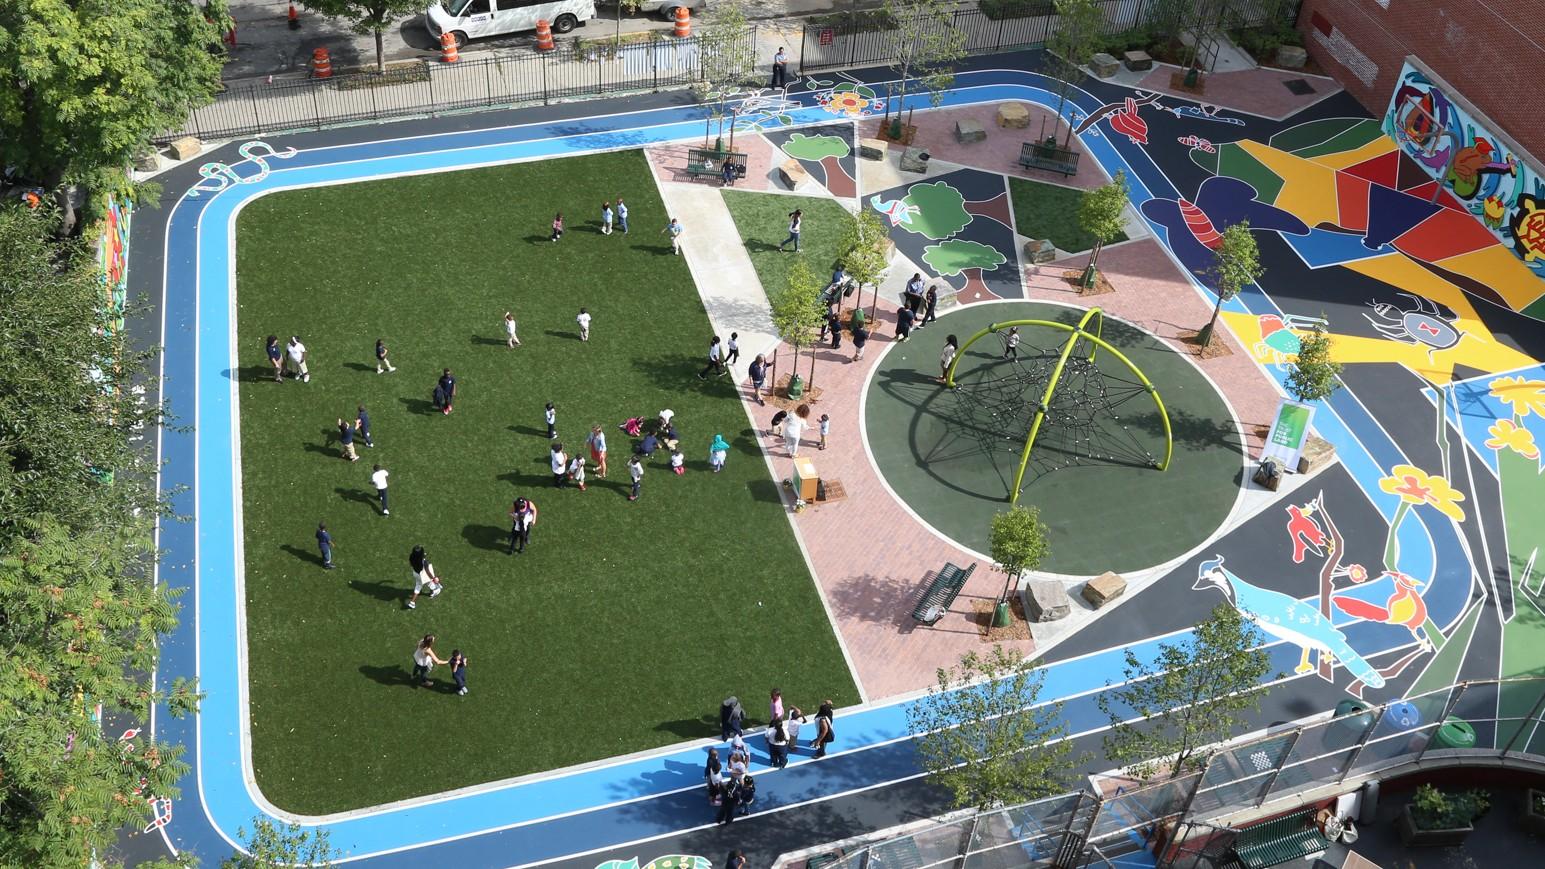 Help Bring Nyc Playgrounds To Life Campaign